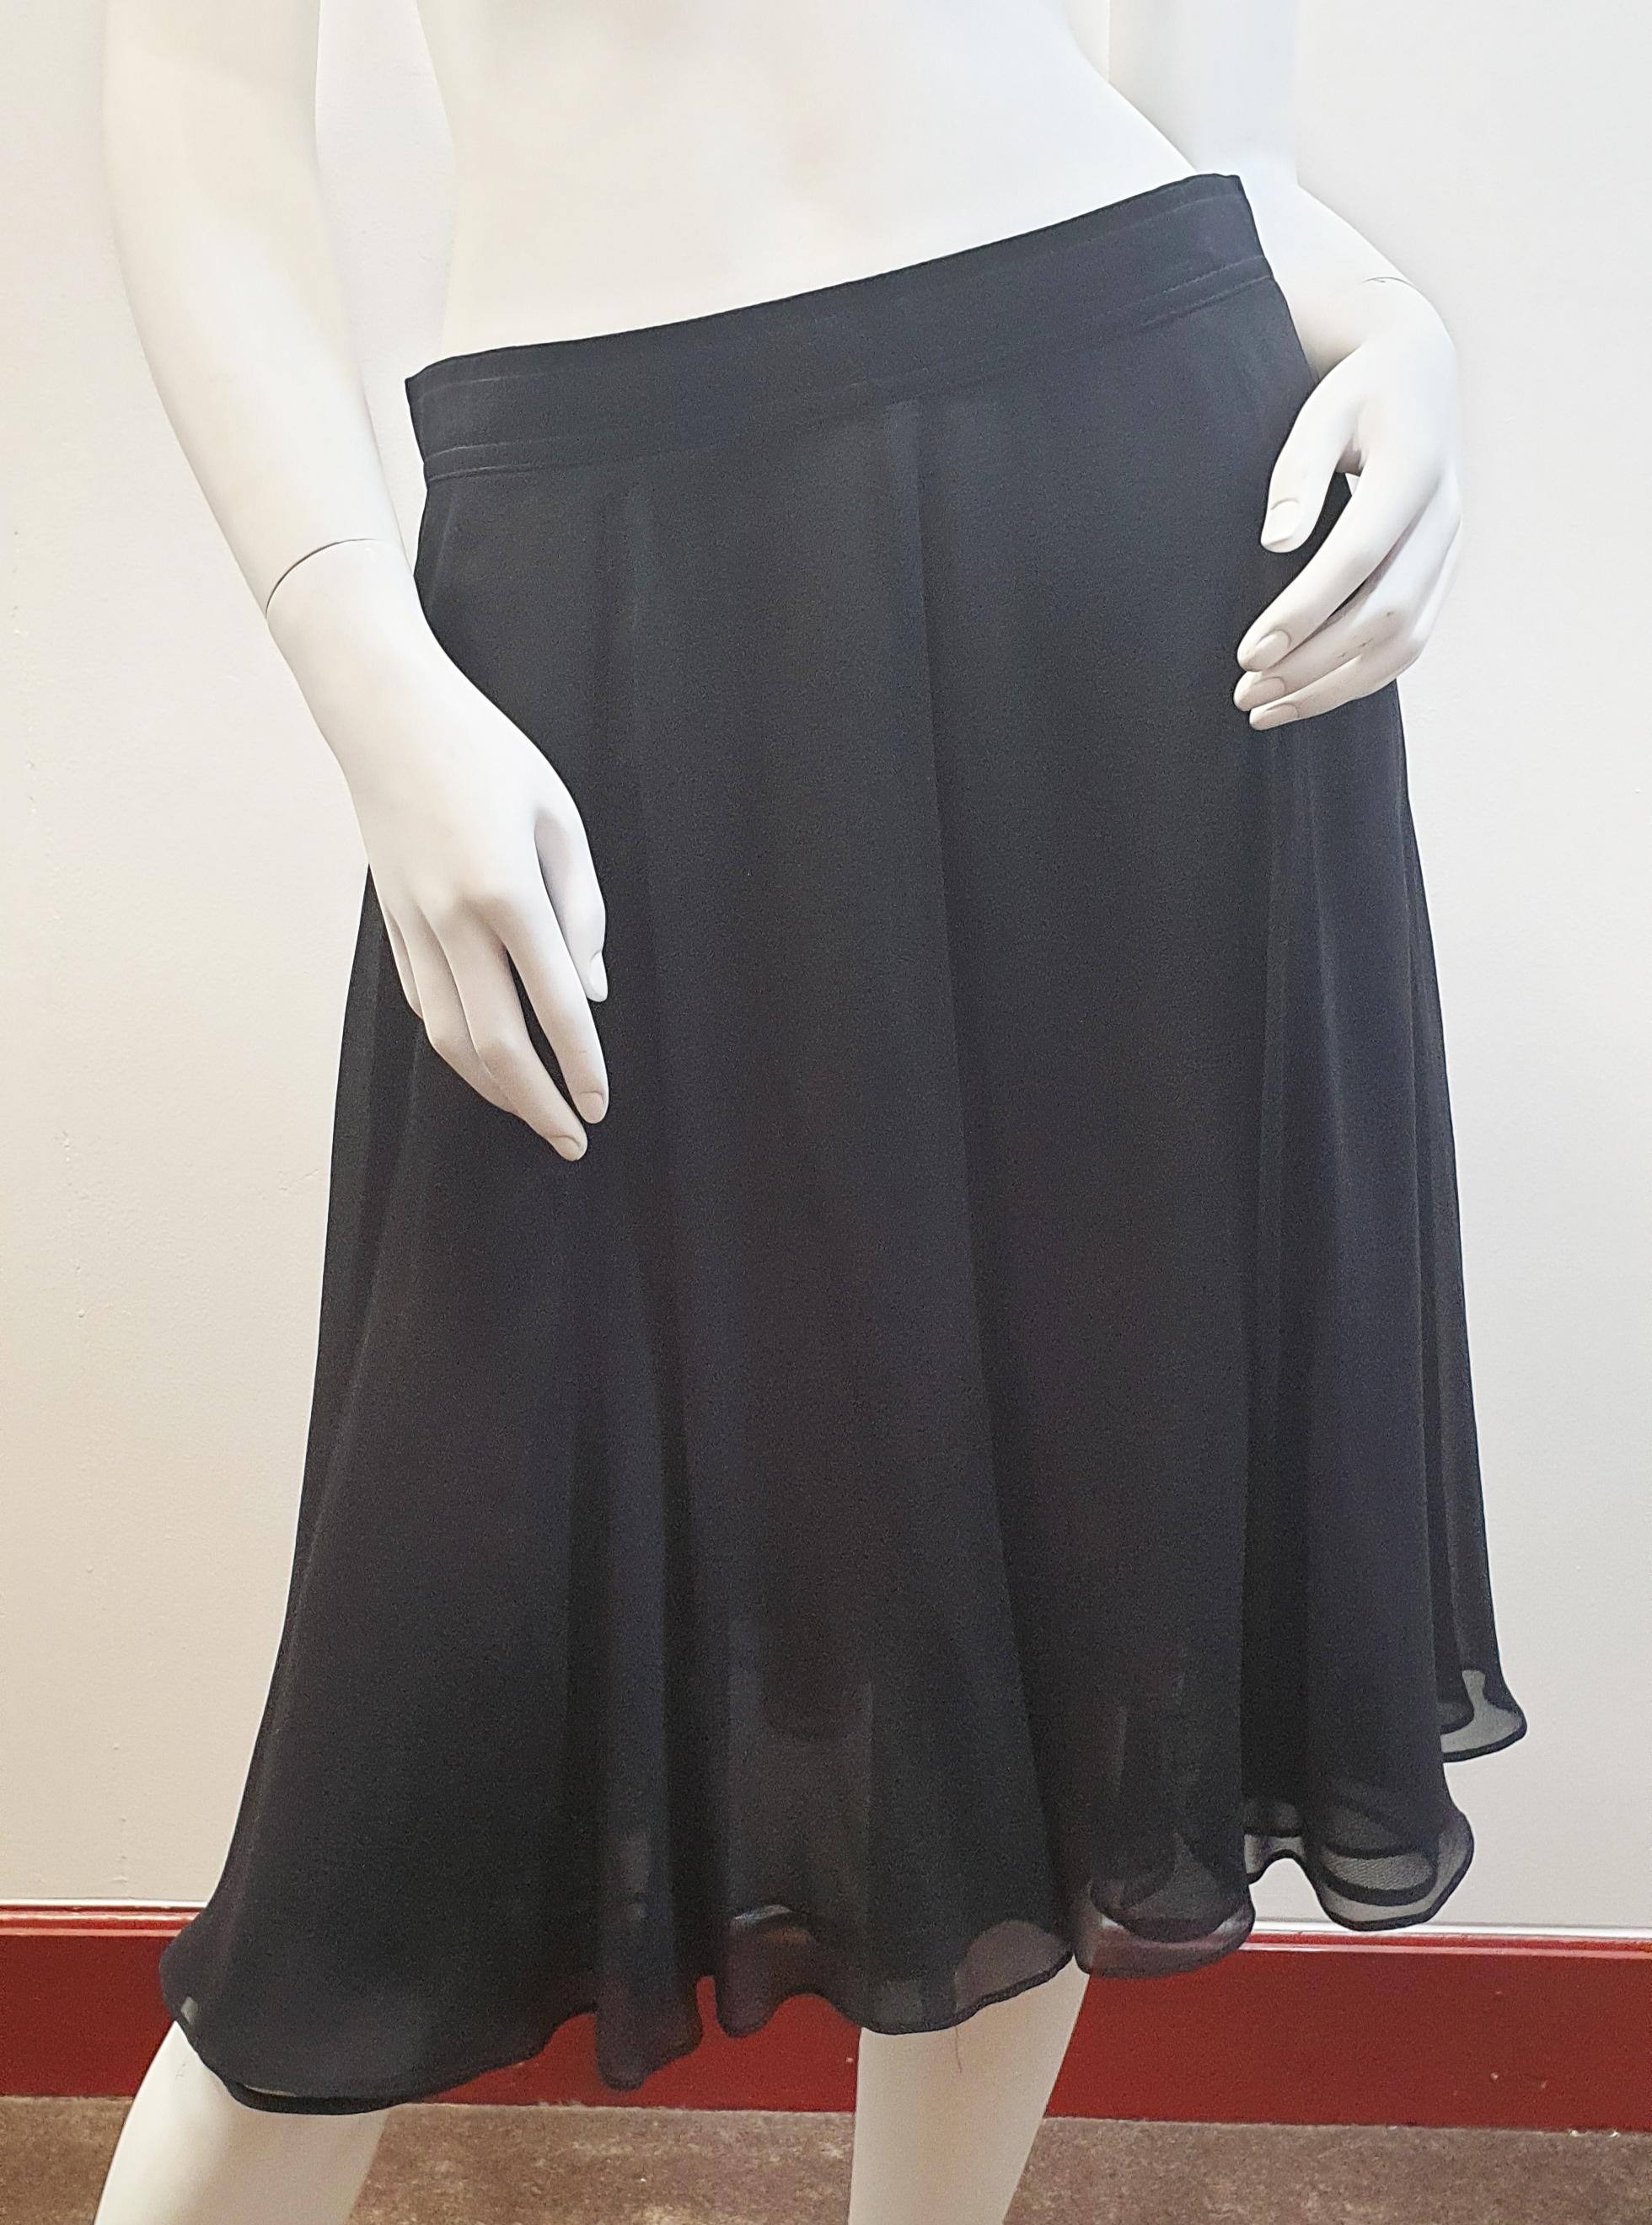 Rena Lange 
Tulle and Viscose Black night skirt seemed to the waist with rayon 
Size 40 Europe, Medium-Tall US
Matching top also on sale 
Rena Lange was founded in 1916 as a lingerie label M. Lange, and is ever since lead by the family Gunthert. In